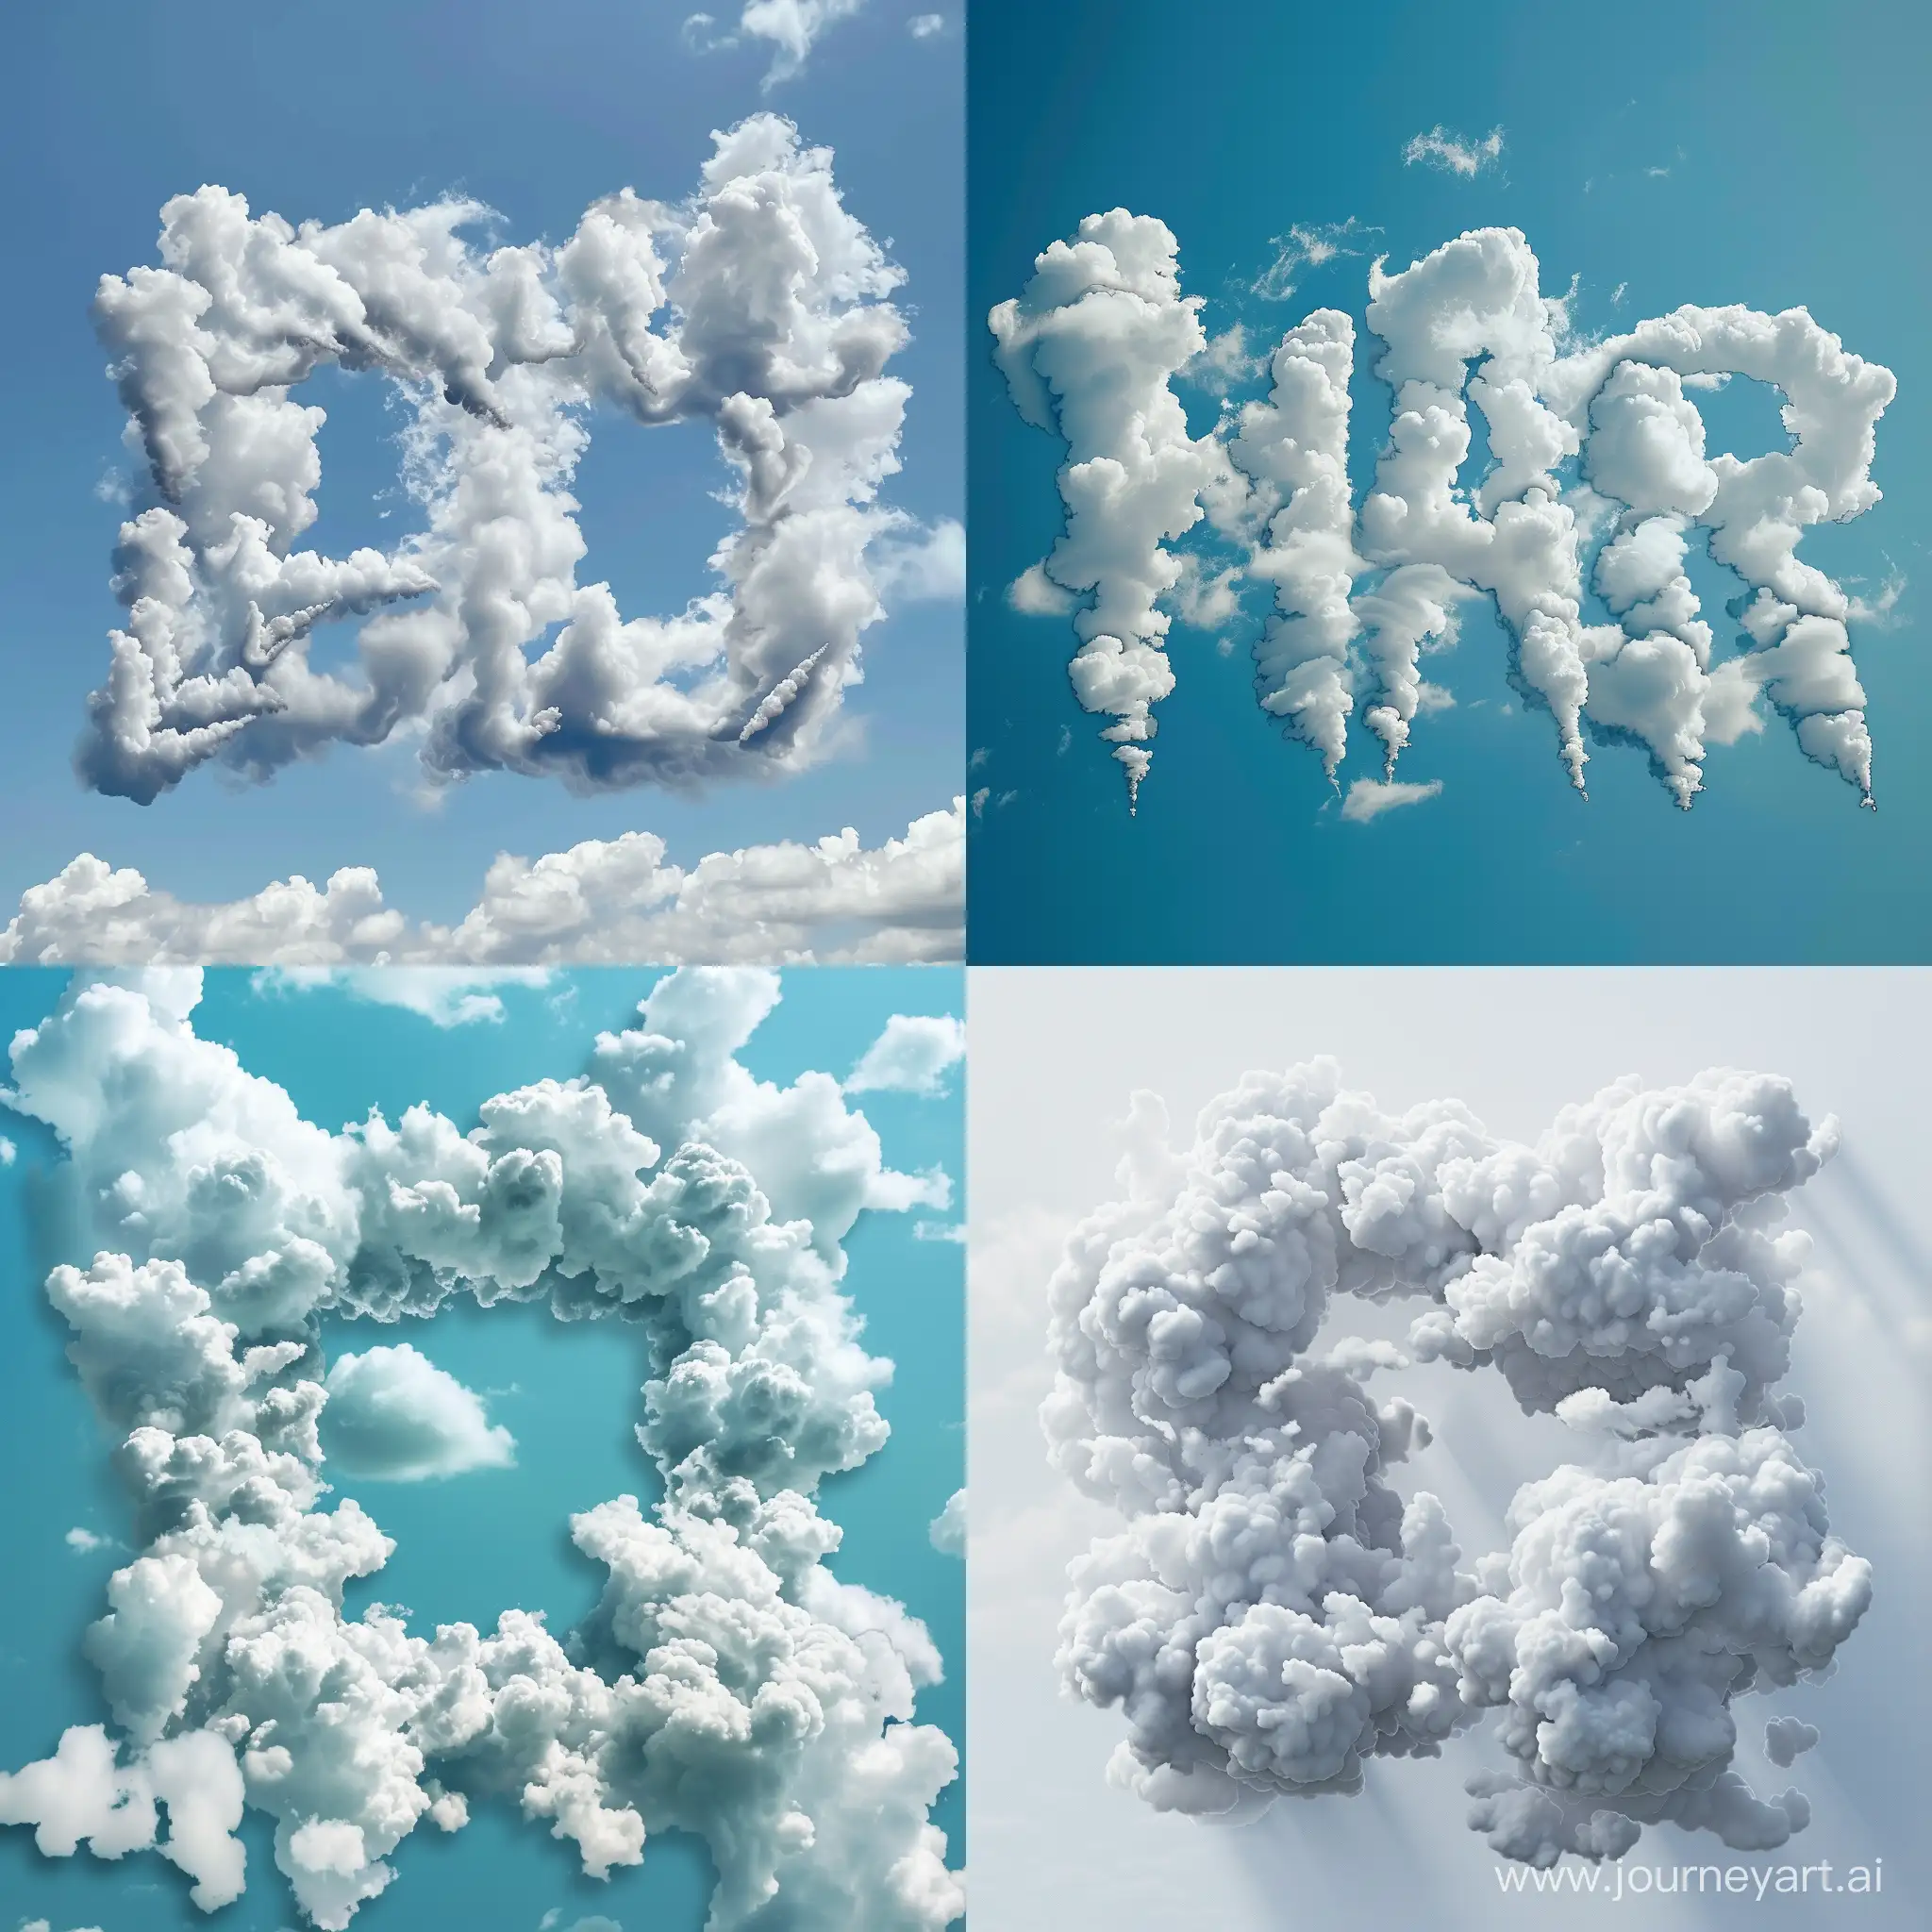 Creative-Art-Design-Formation-with-Clouds